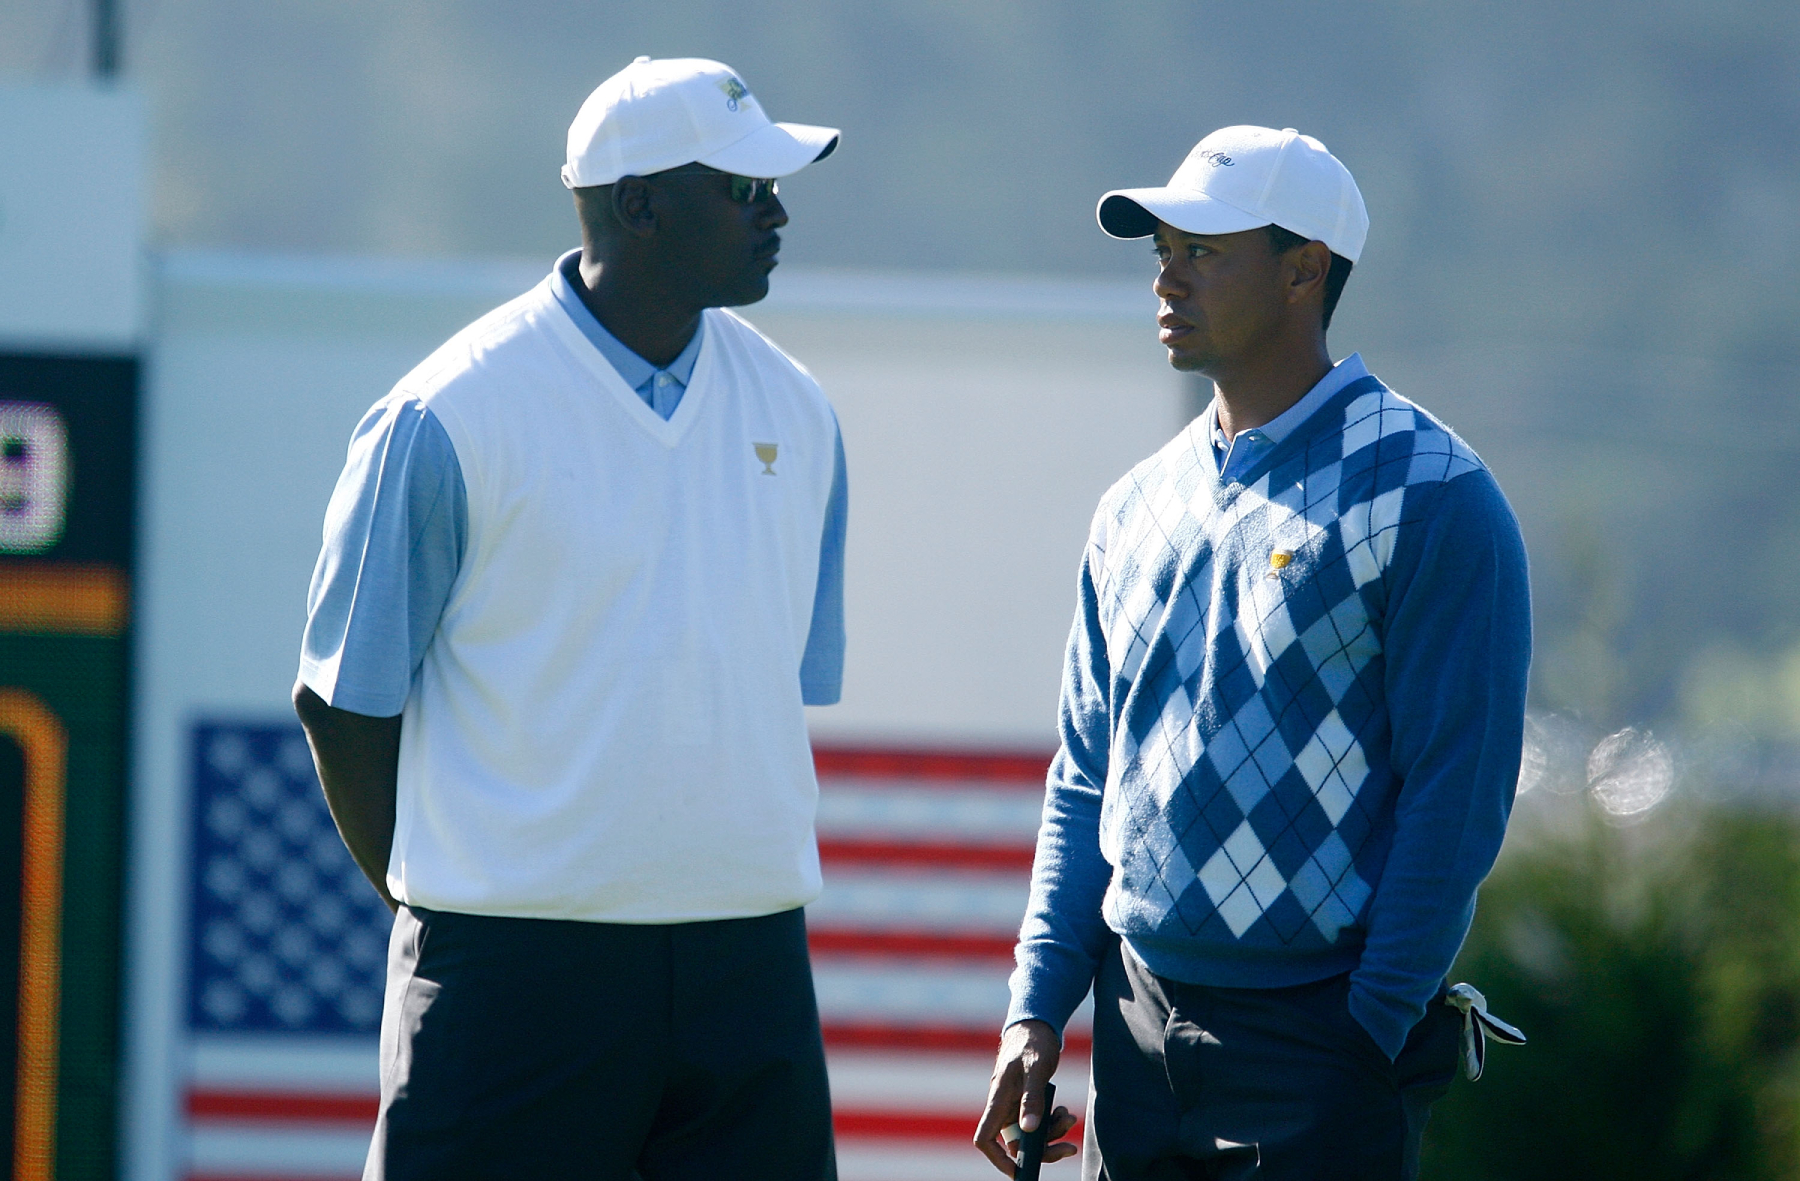 Michael Jordan and Tiger Woods have both meant a lot to their respective sports. Jordan certainly has some high praise for Woods.